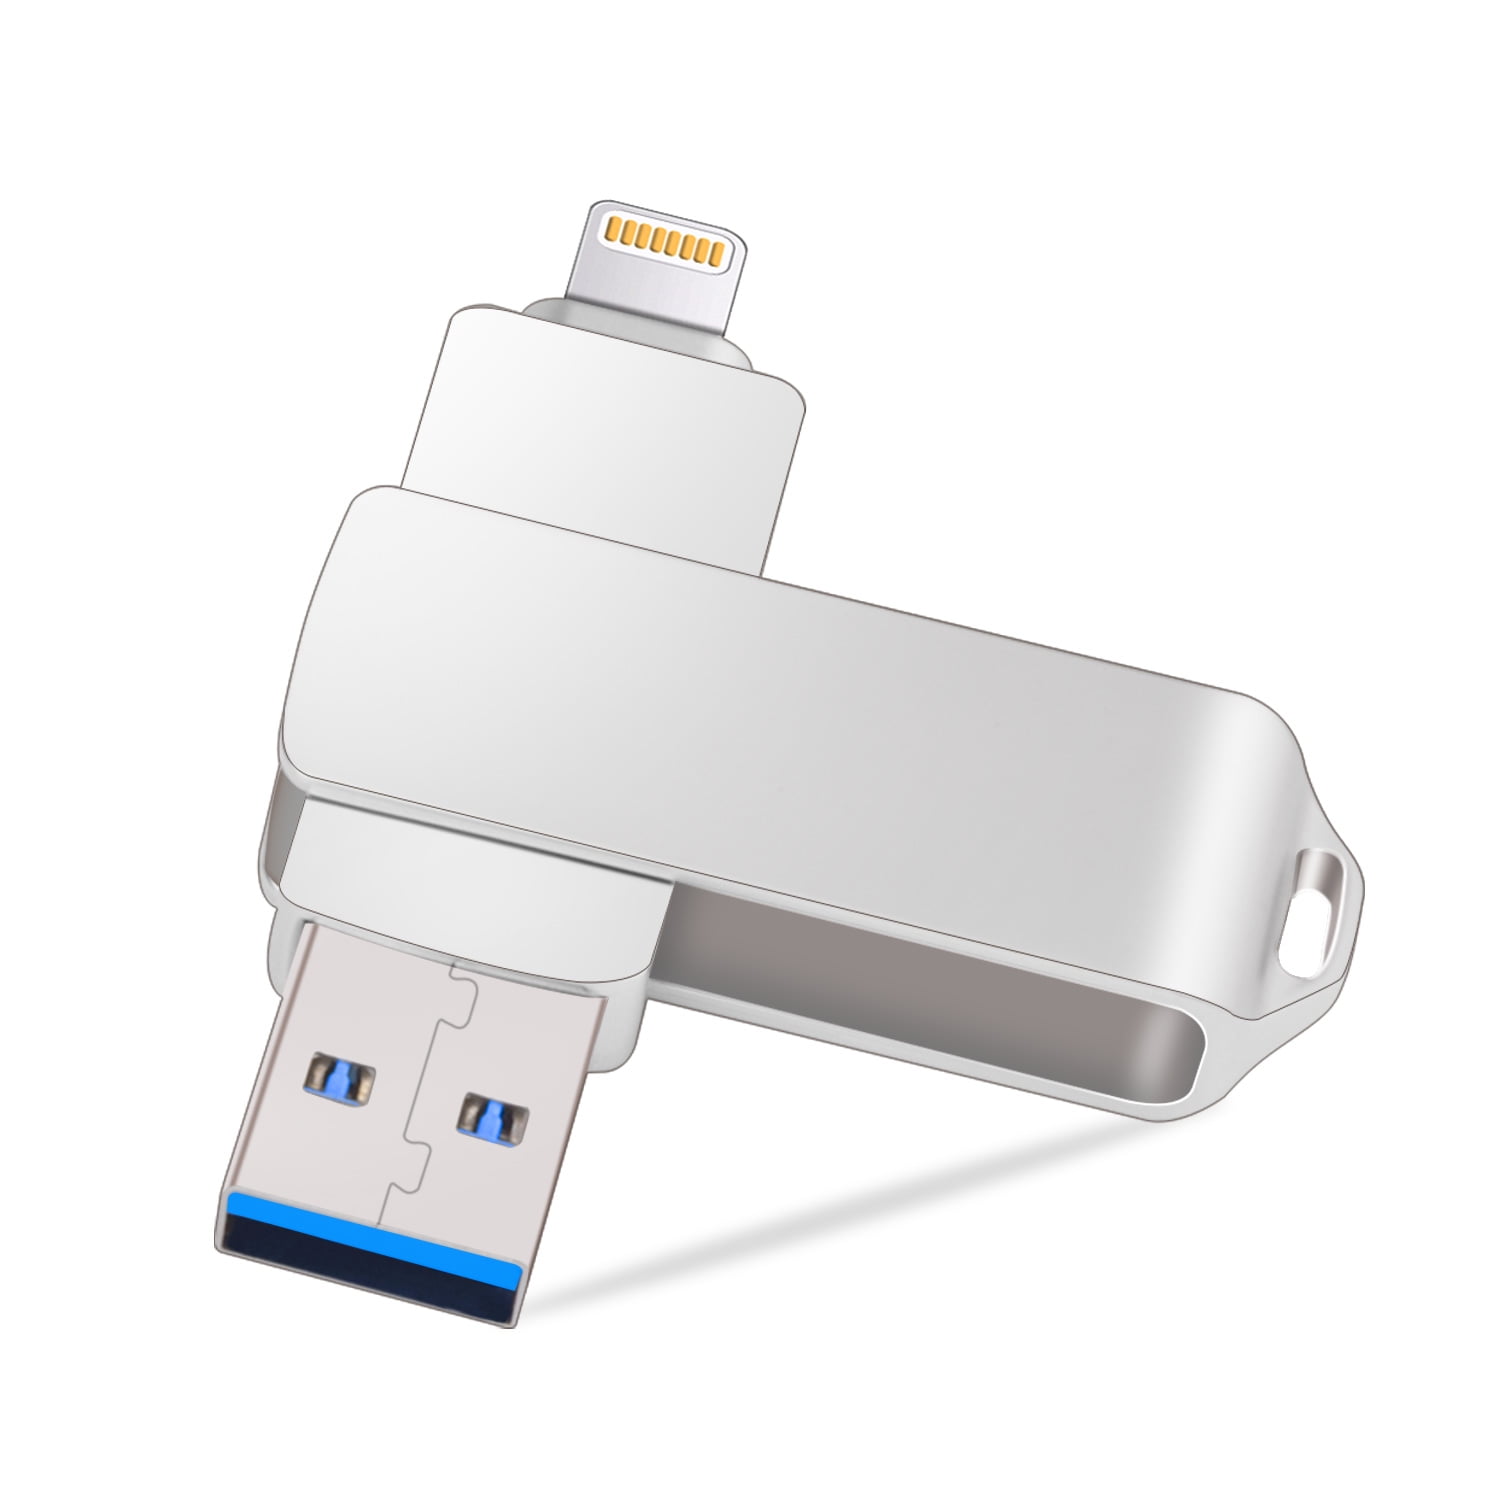 Planlagt At vise katastrofale 64GB USB Lightning Flash Drive for iPhone KOOTION USB 3.0 Type C 3-In-1  Metal Thumb Drive Jump Drives Memory Stick External Storage for iOS iPhone  iPad MacBook PC, Android - Walmart.com